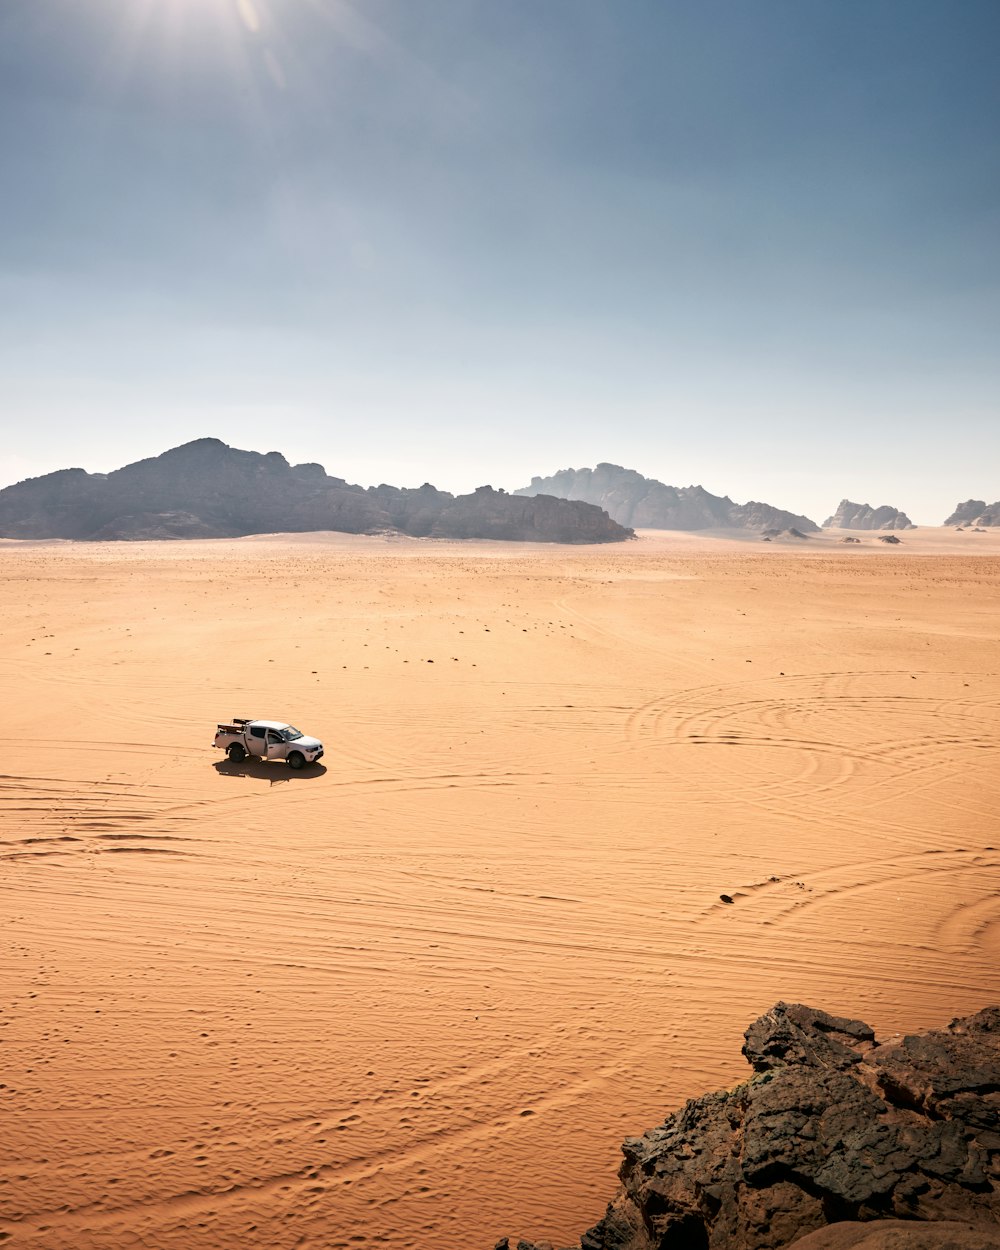 a vehicle driving through the desert with mountains in the background